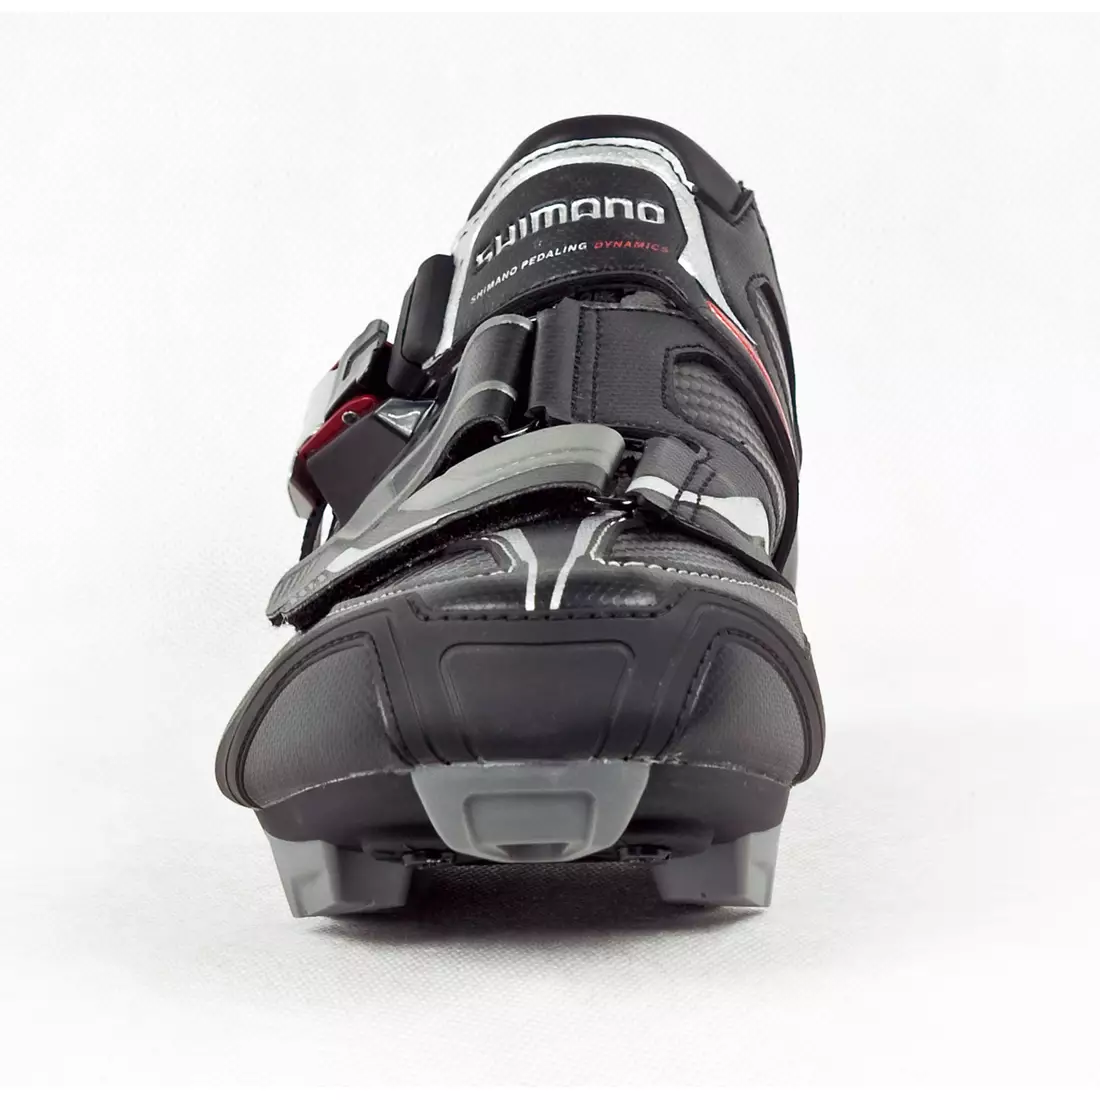 SHIMANO SH-XC50N - MTB cycling shoes, color: black and red